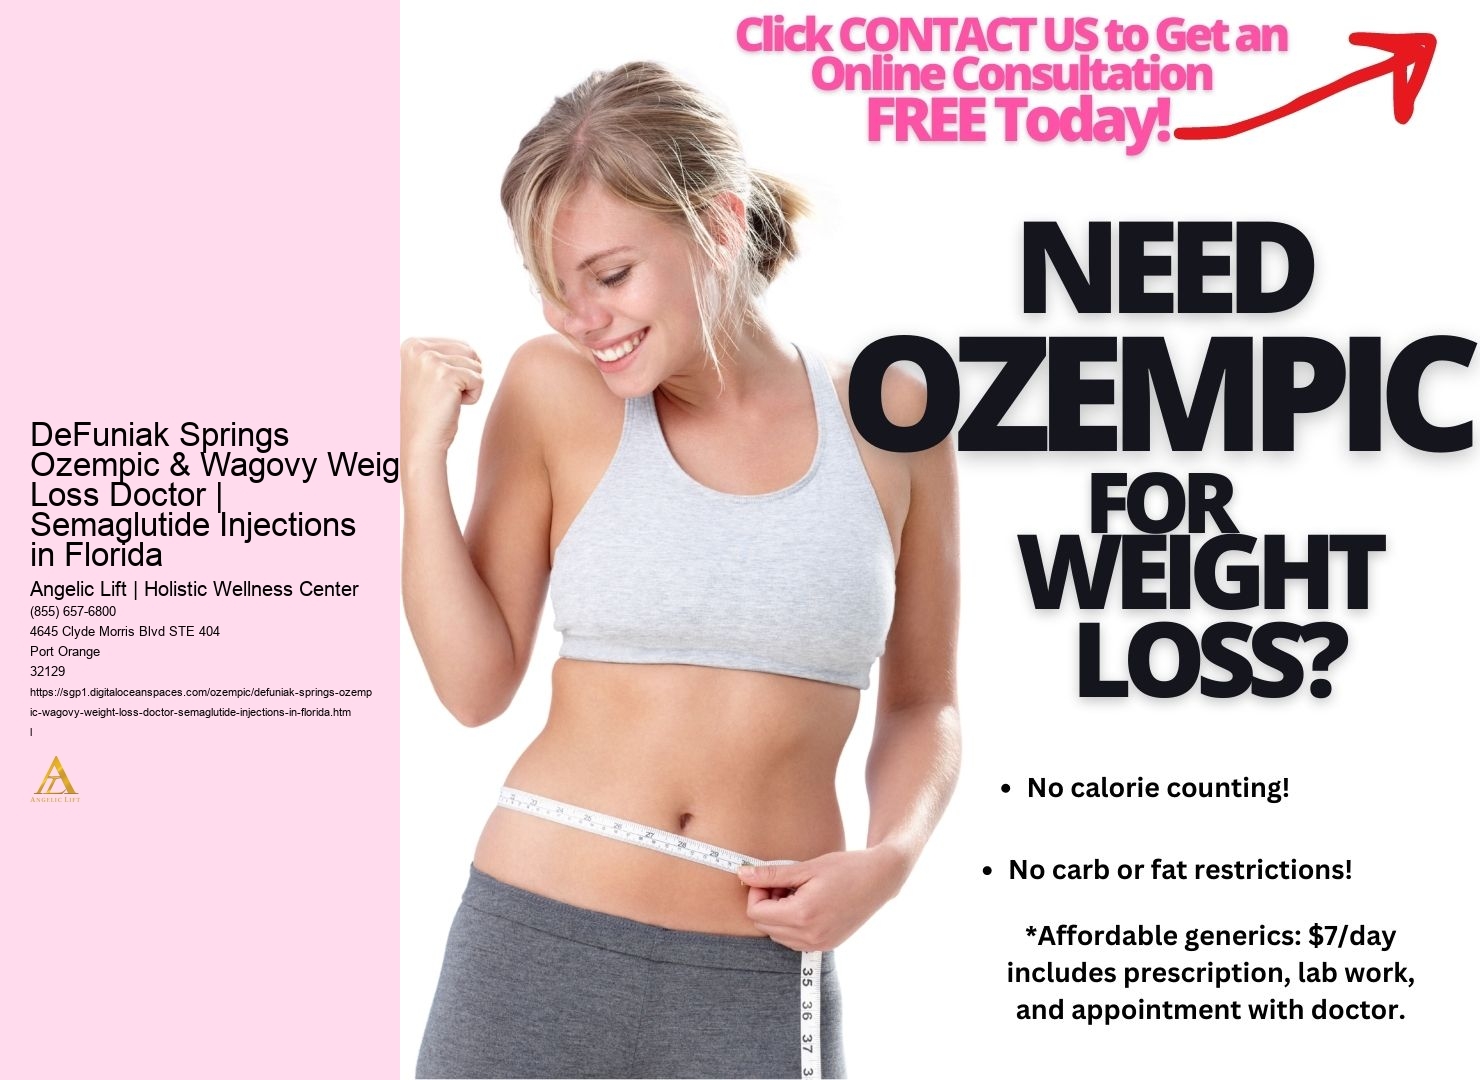 DeFuniak Springs Ozempic & Wagovy Weight Loss Doctor | Semaglutide Injections in Florida